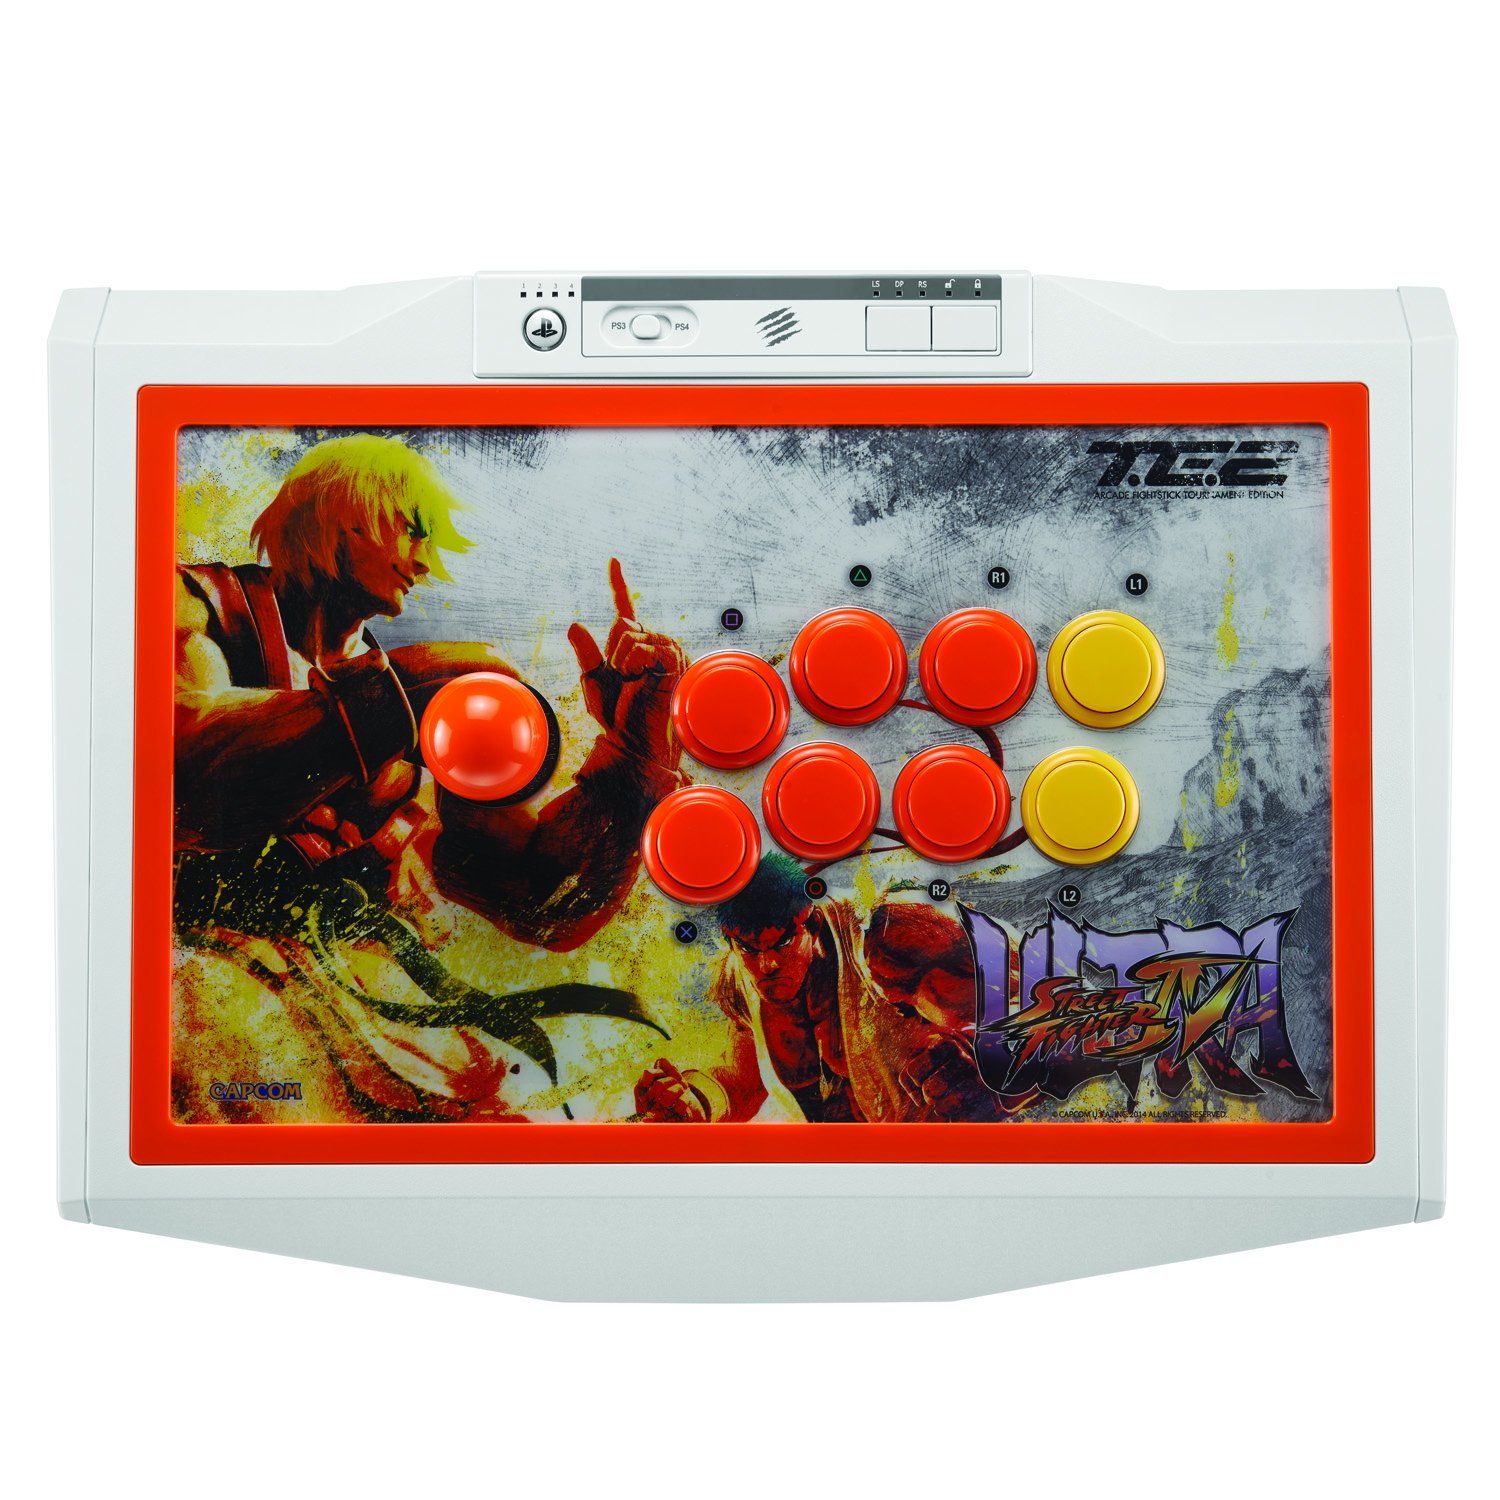 Mad Catz - Ultra Street Fighter IV Arcade FightStick Tournament Edition 2 - [PS4]